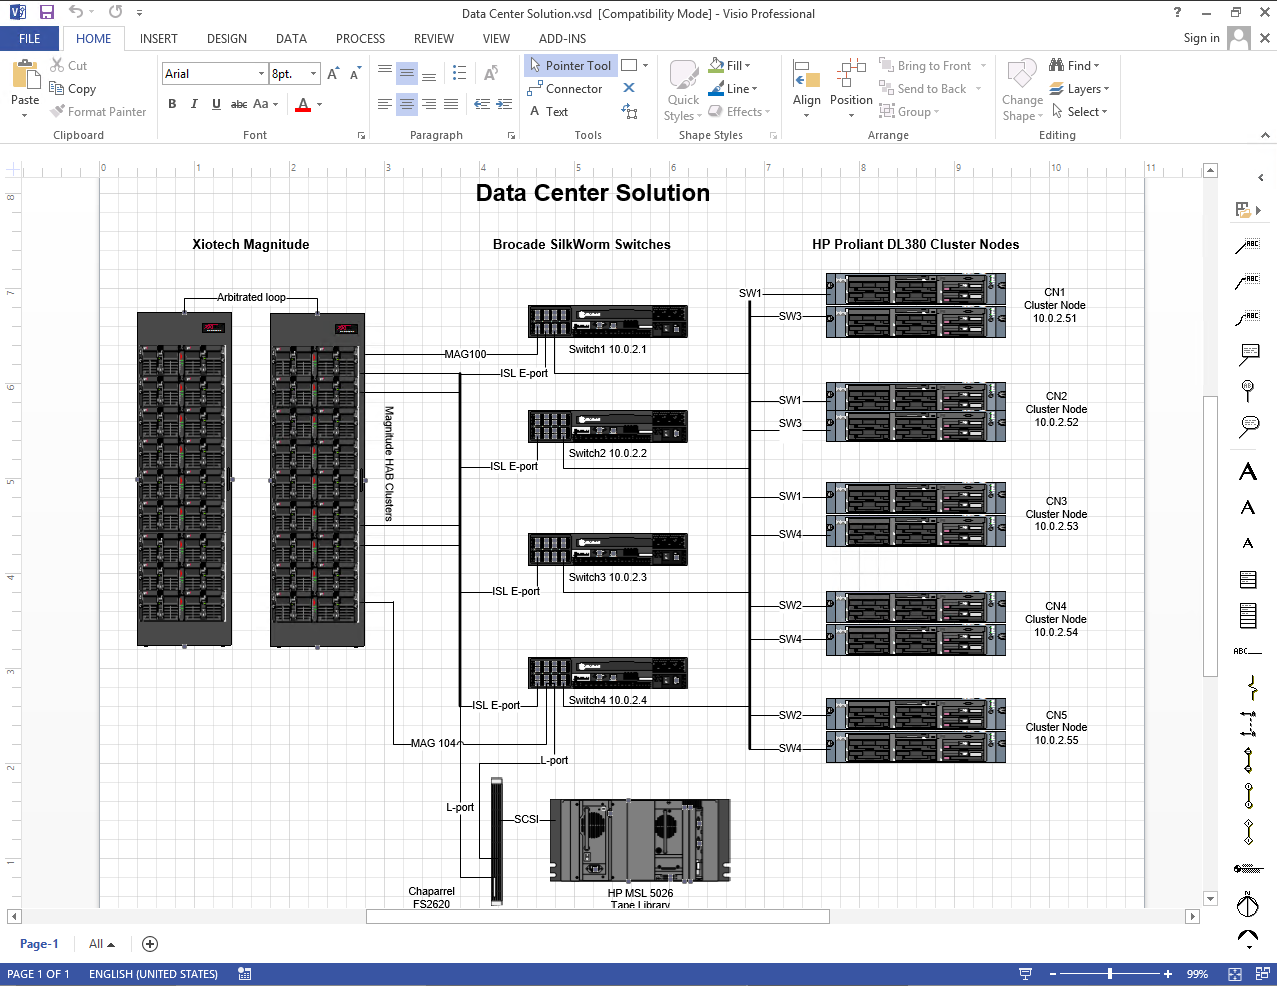 24 Good Sample Of Visio Stencils For Network Diagrams